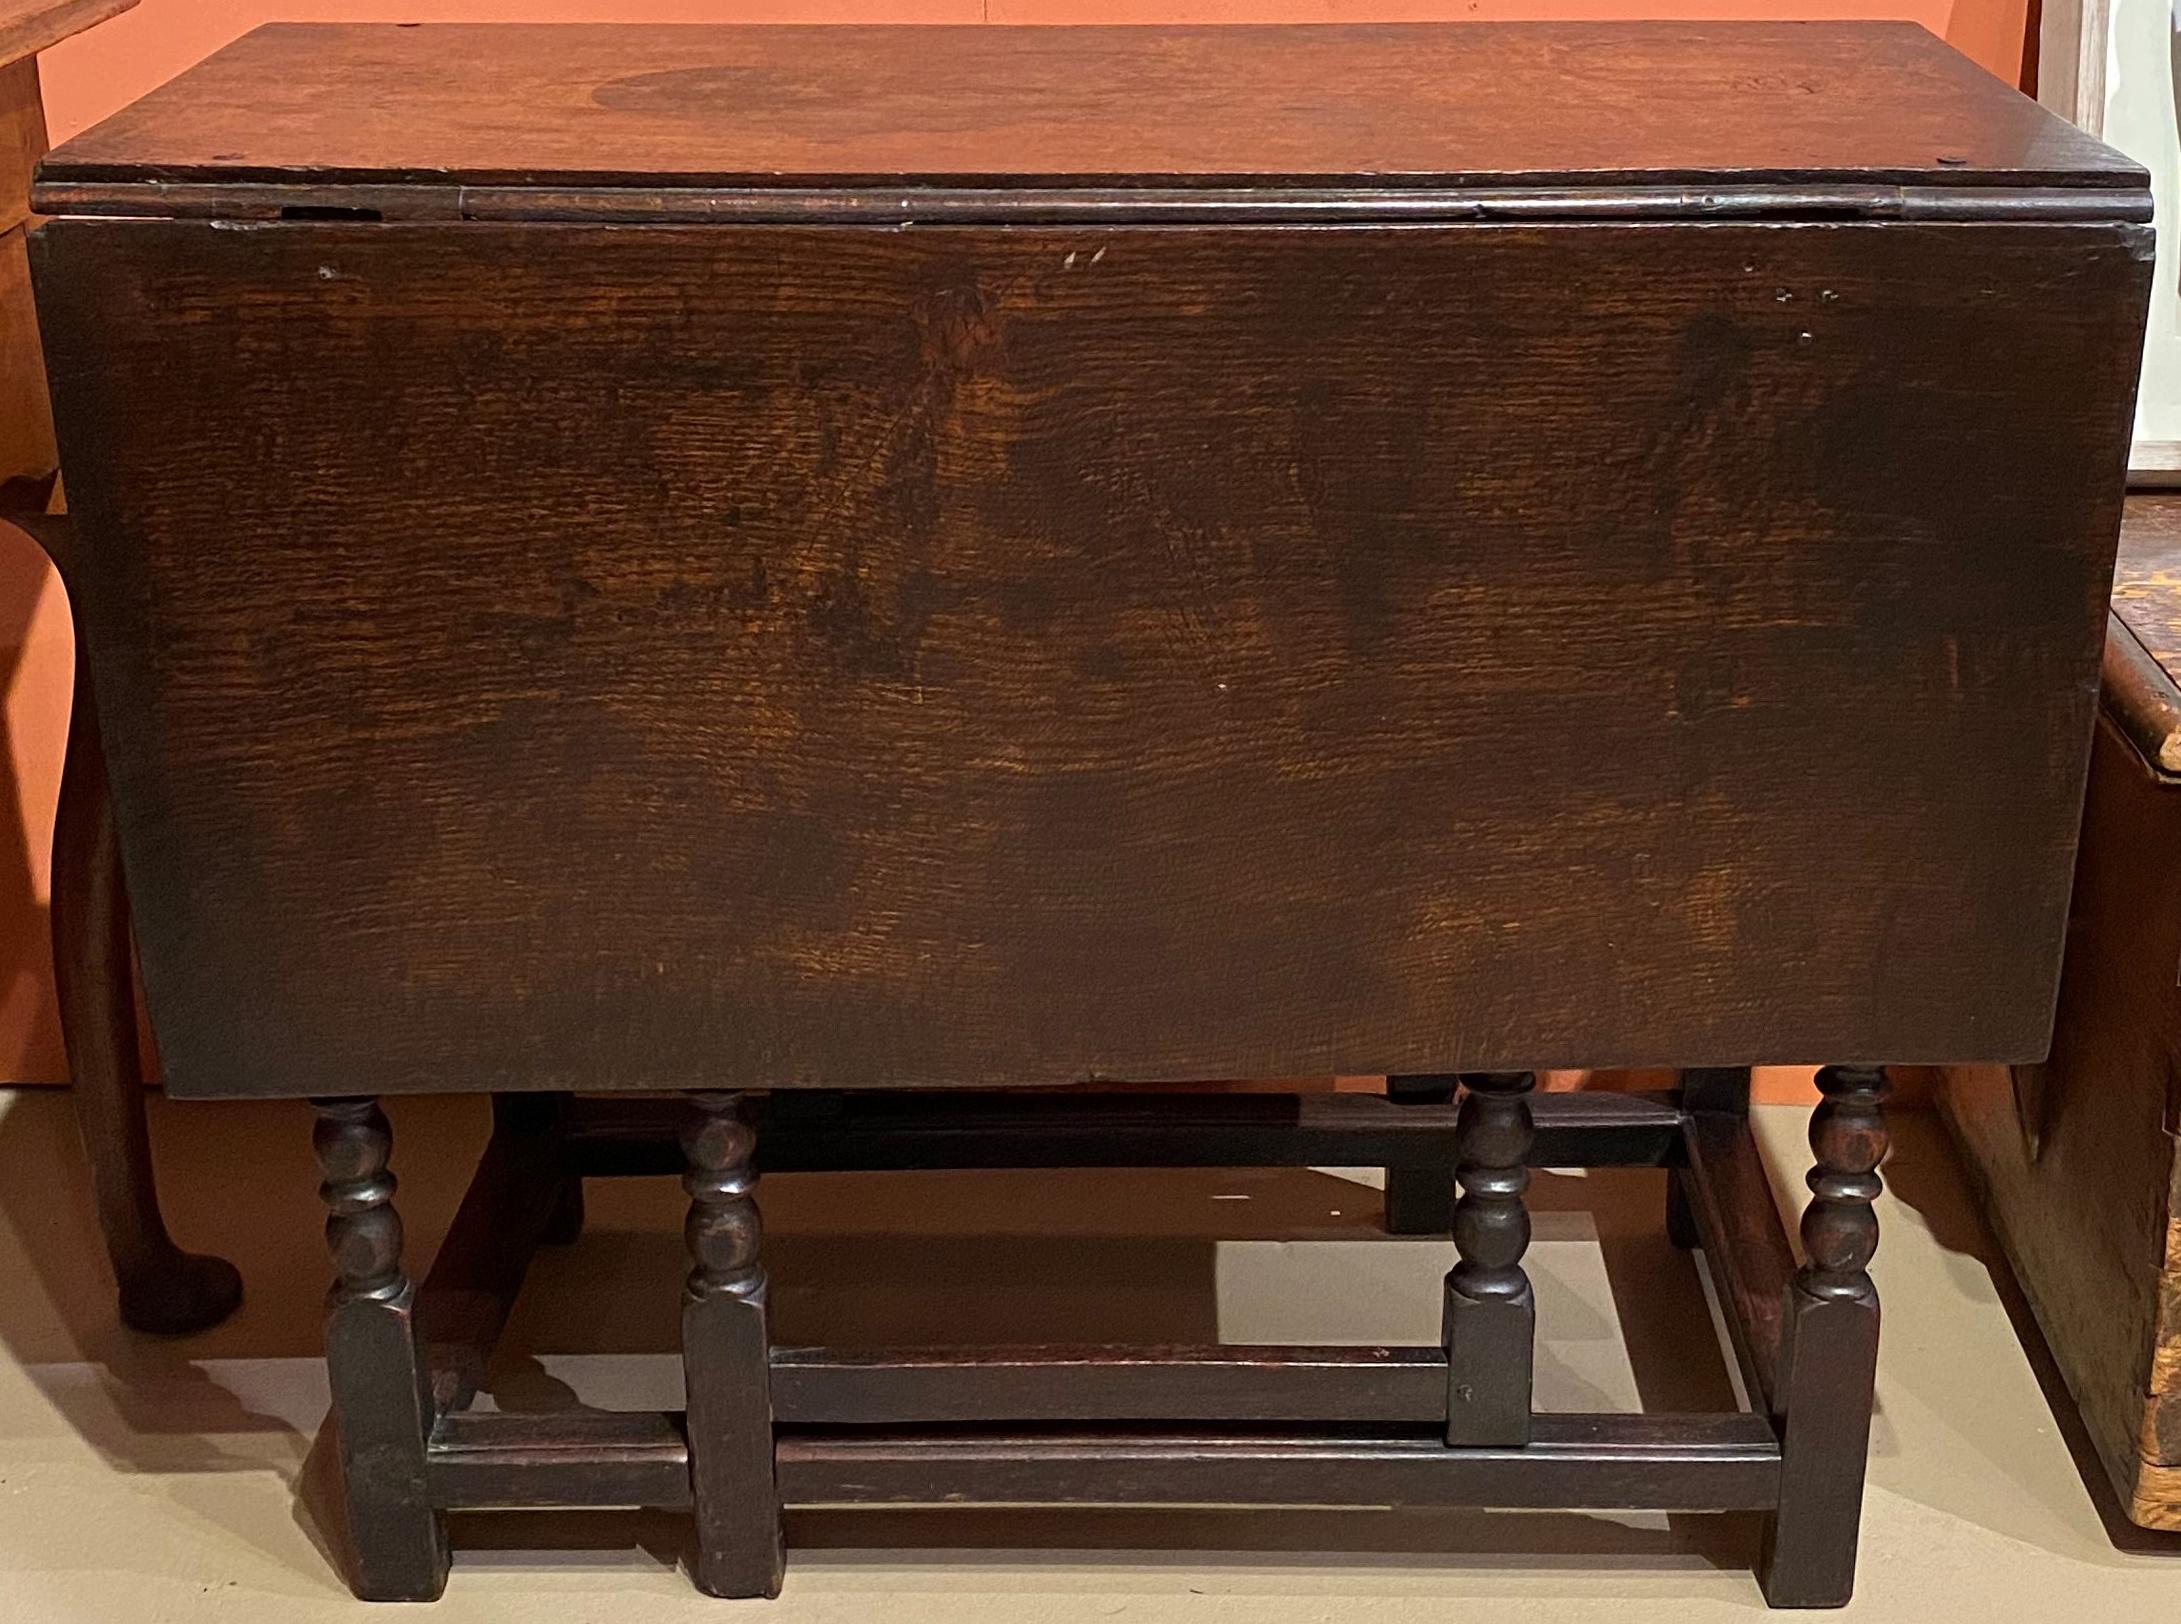 A fine example of an 18th century English oak drop leaf gateleg table with nice turned legs, and a swing gate leg on each side, along with a stretcher base. The table has probably retained its original surface in very good condition, with some small